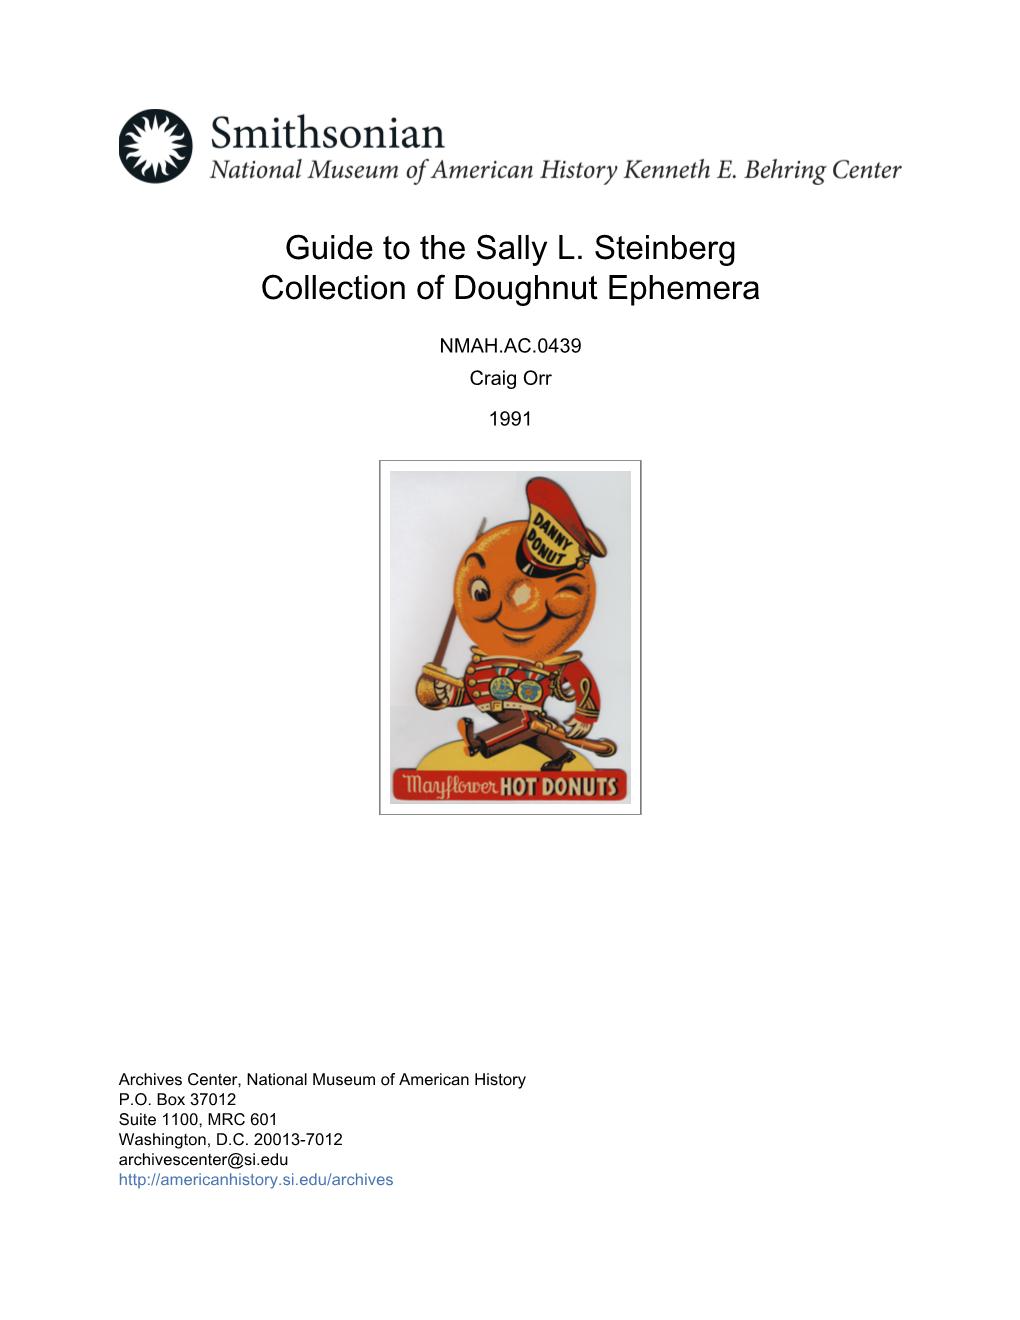 Guide to the Sally L. Steinberg Collection of Doughnut Ephemera